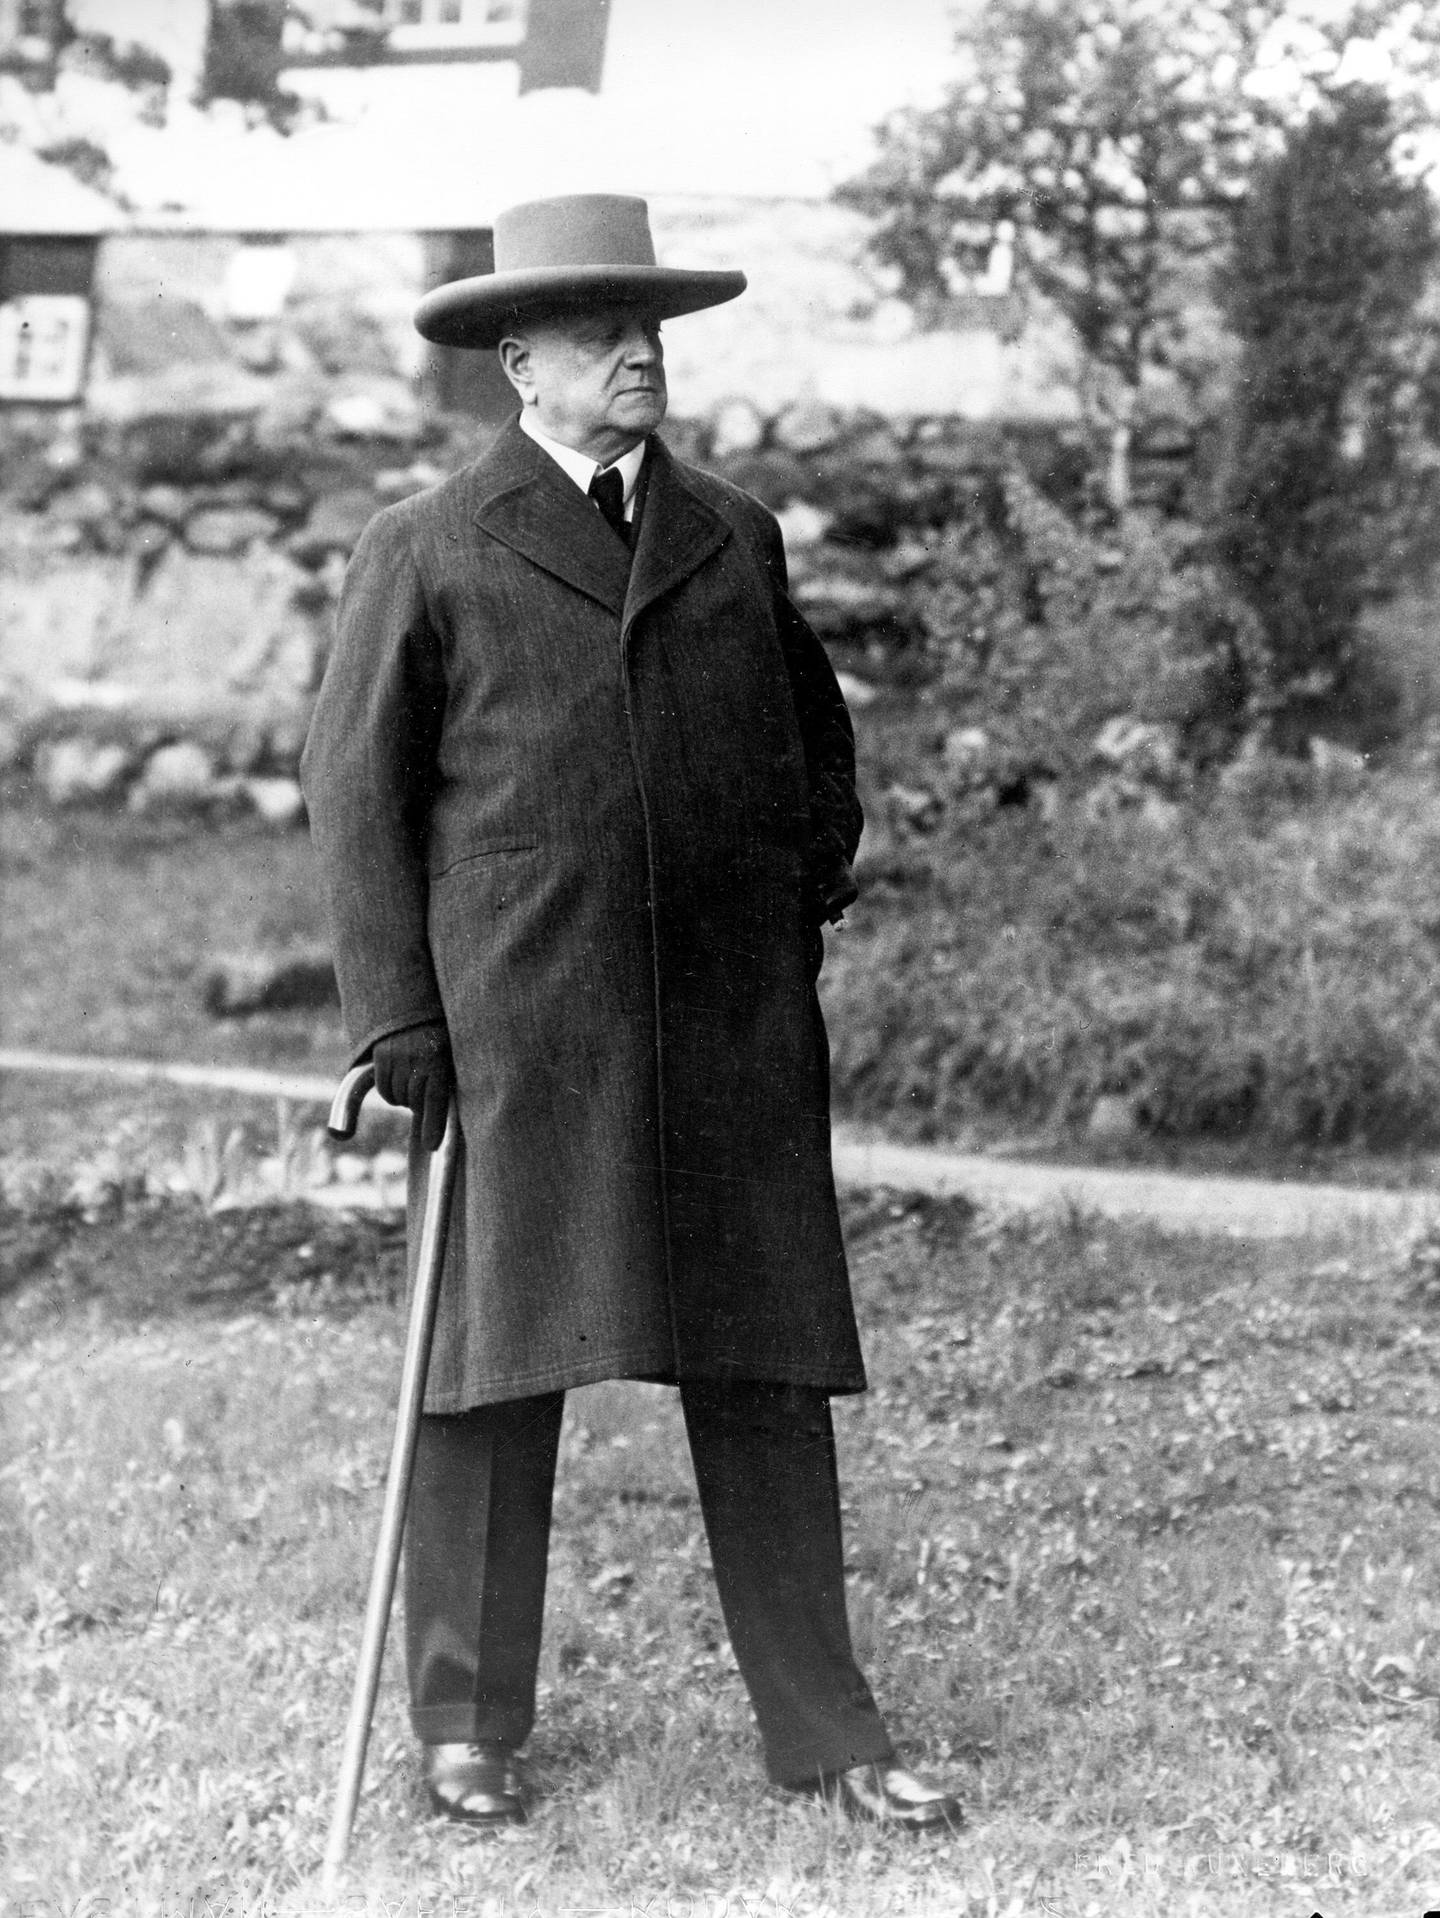 Finnish composer Jean Sibelius, wearing a broad brimmed hat and holding a walking stick, is shown in Finland in Jan. 1938.  (AP Photo)